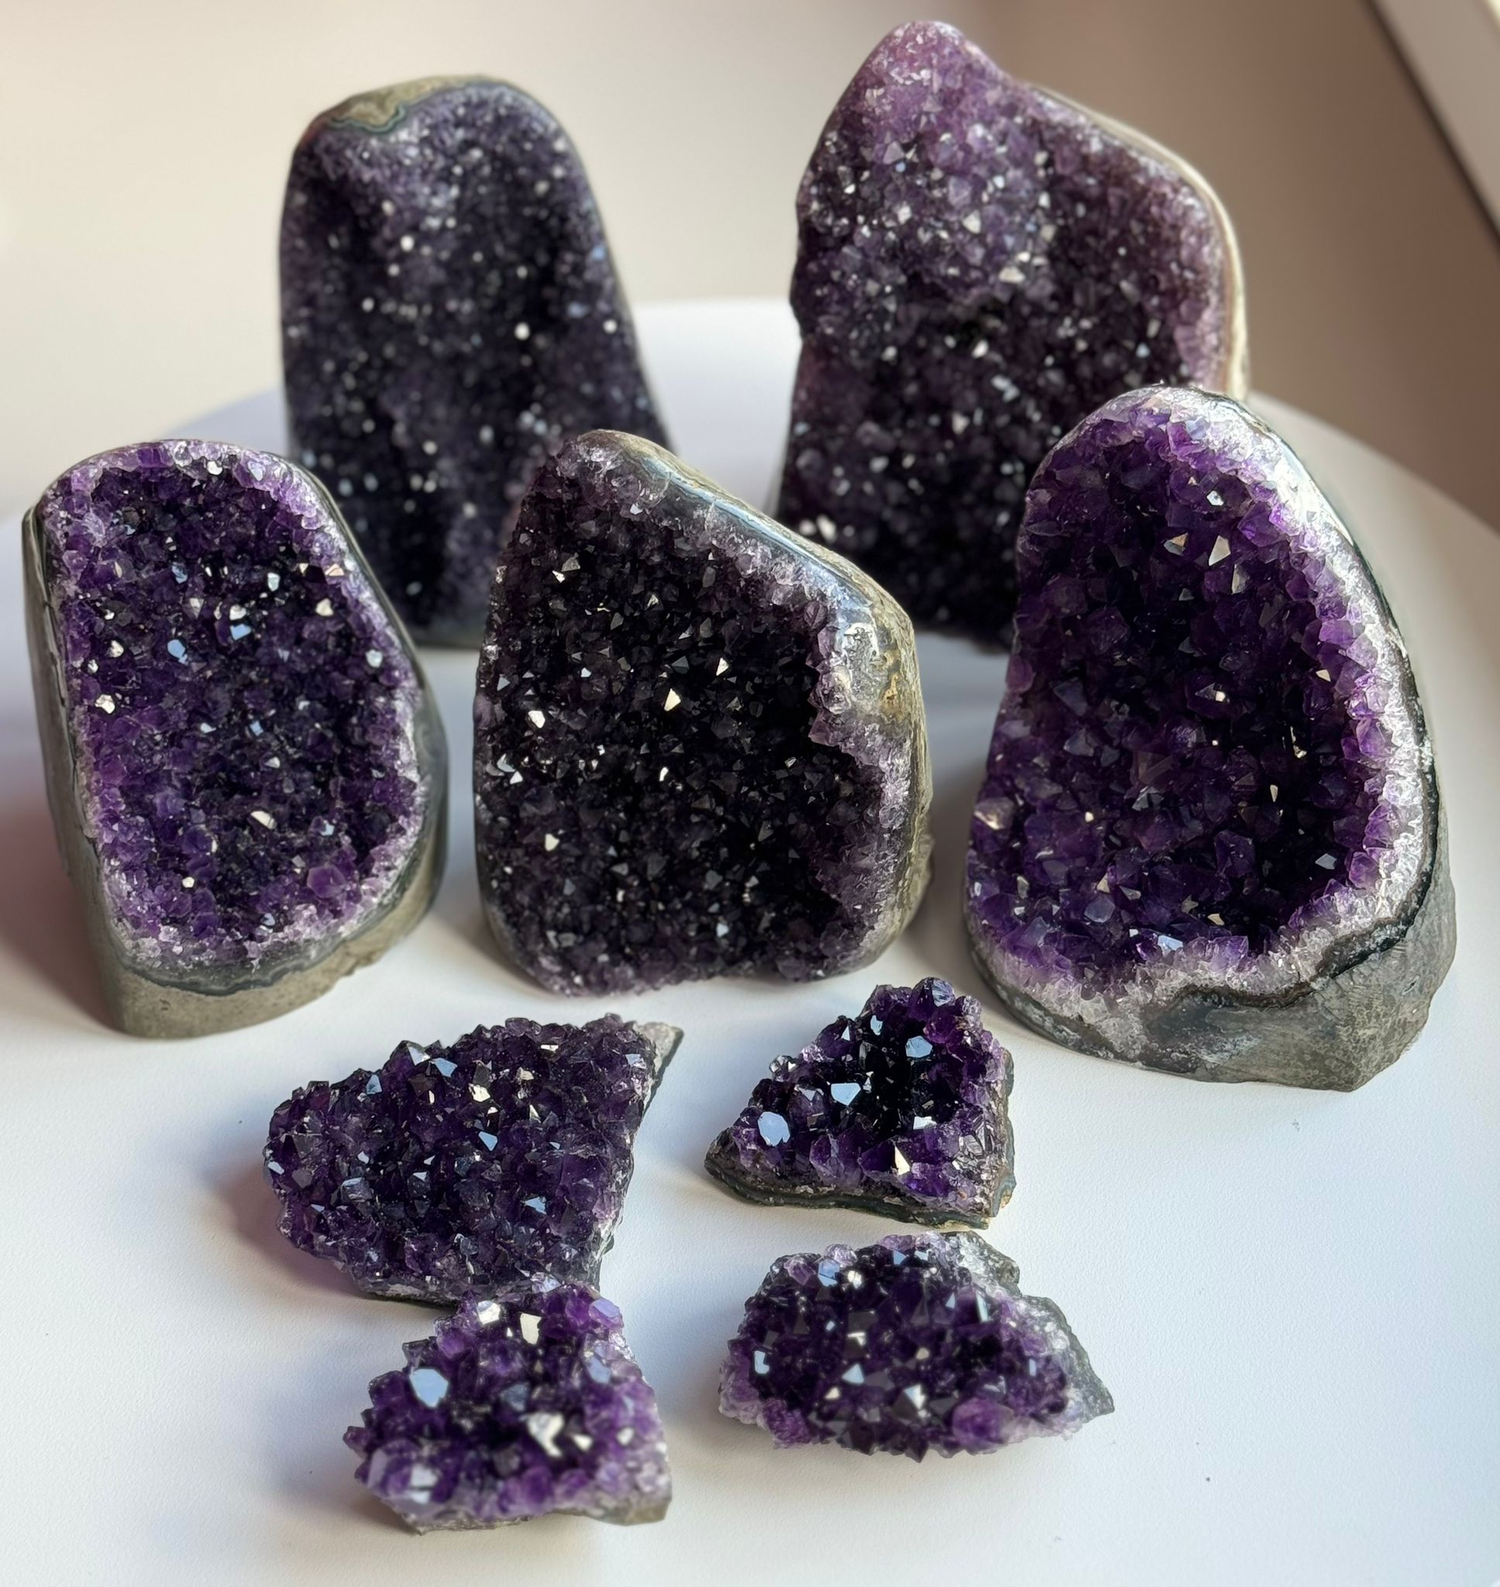 Geode / Clusters